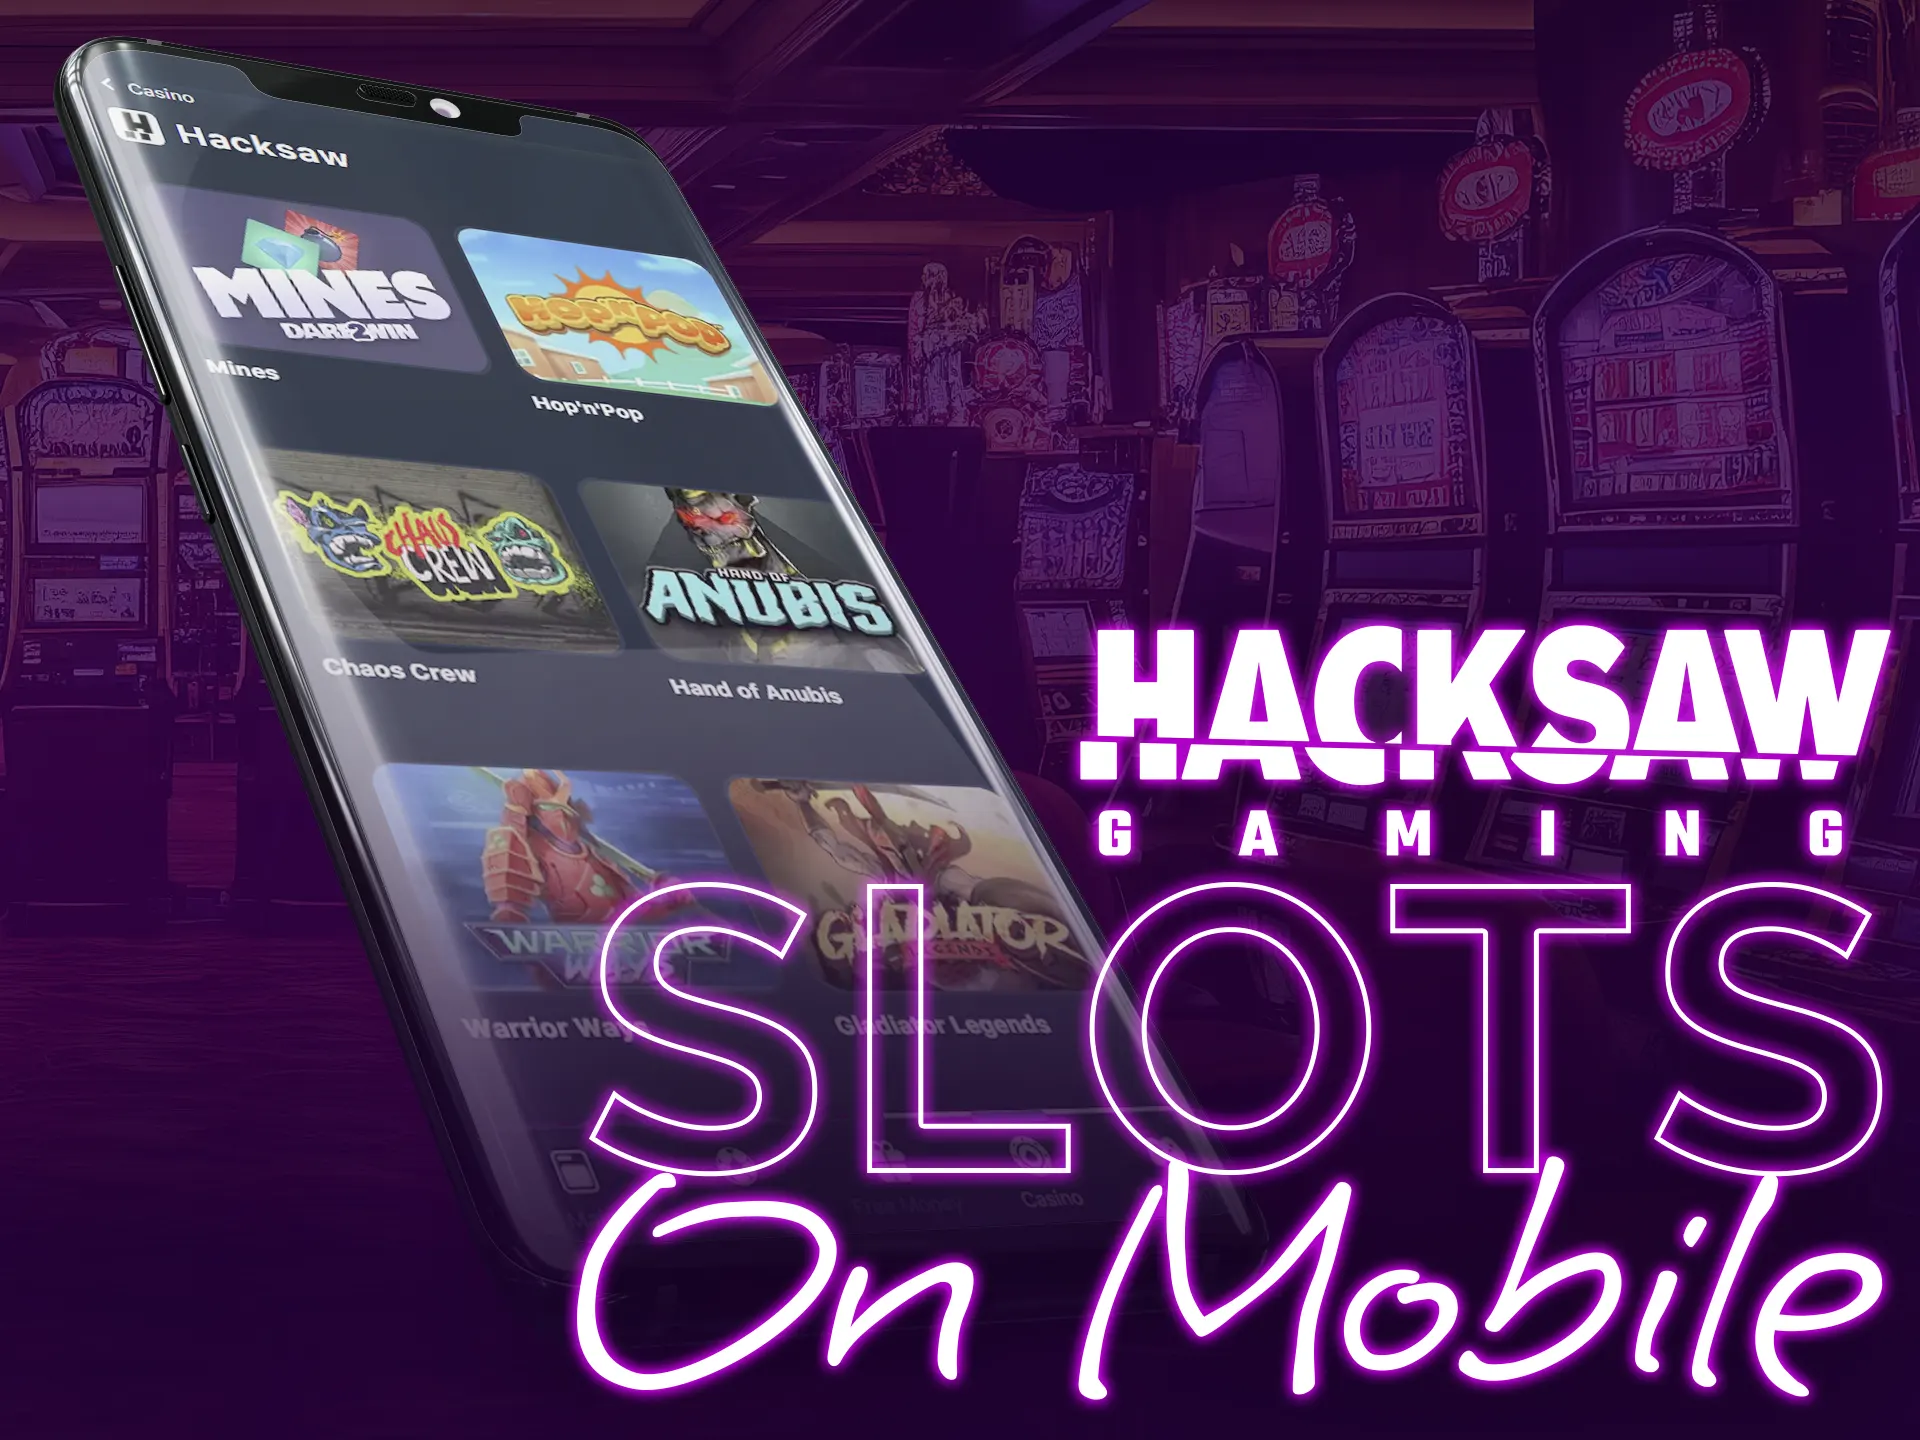 Hacksaw Gaming's slots works better on mobile devices.